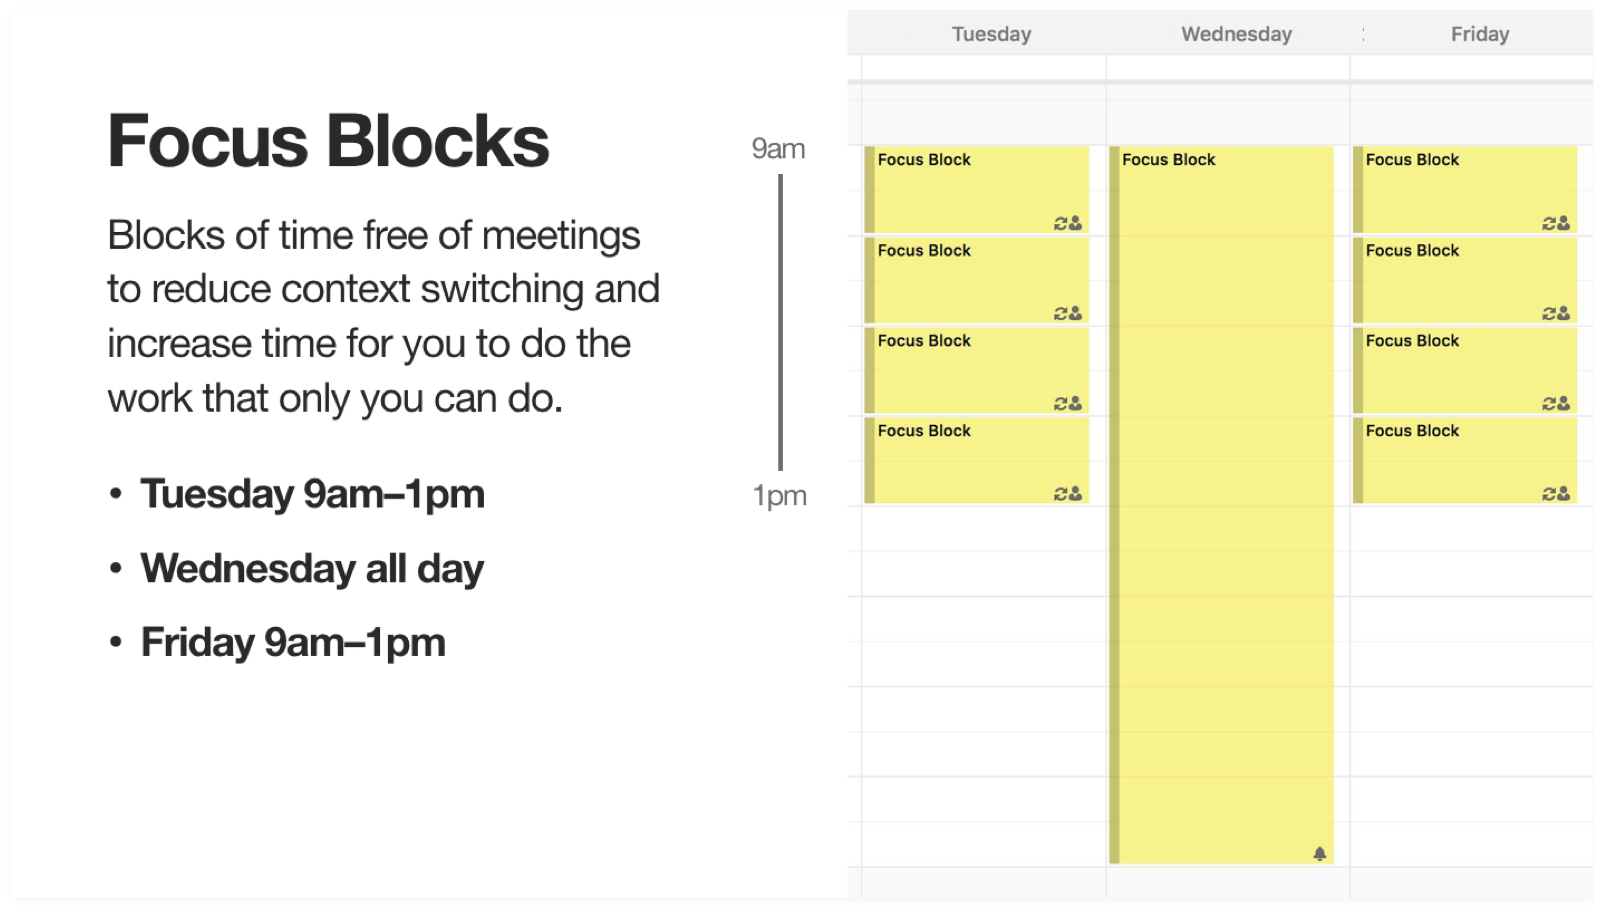 Screenshot showing focus block times 9am to 1pm on Tuesdays and Fridays, all day Wednesdays